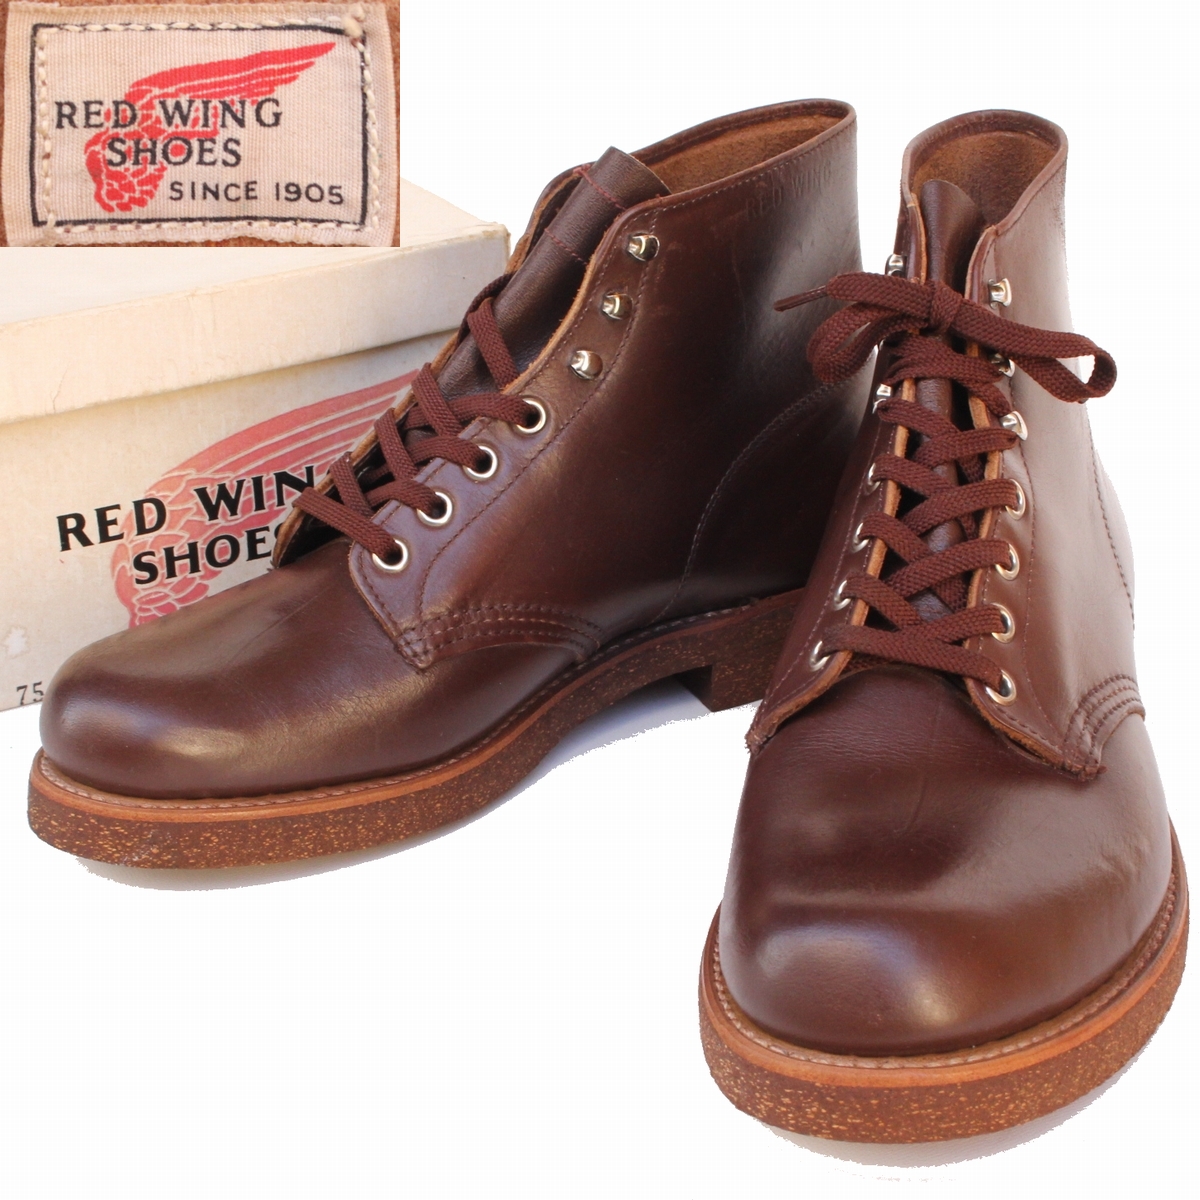 Details about   Vintage Red Wing Heritage Boots Stainless Steel Shoe Horn 4 inch New Deadstock